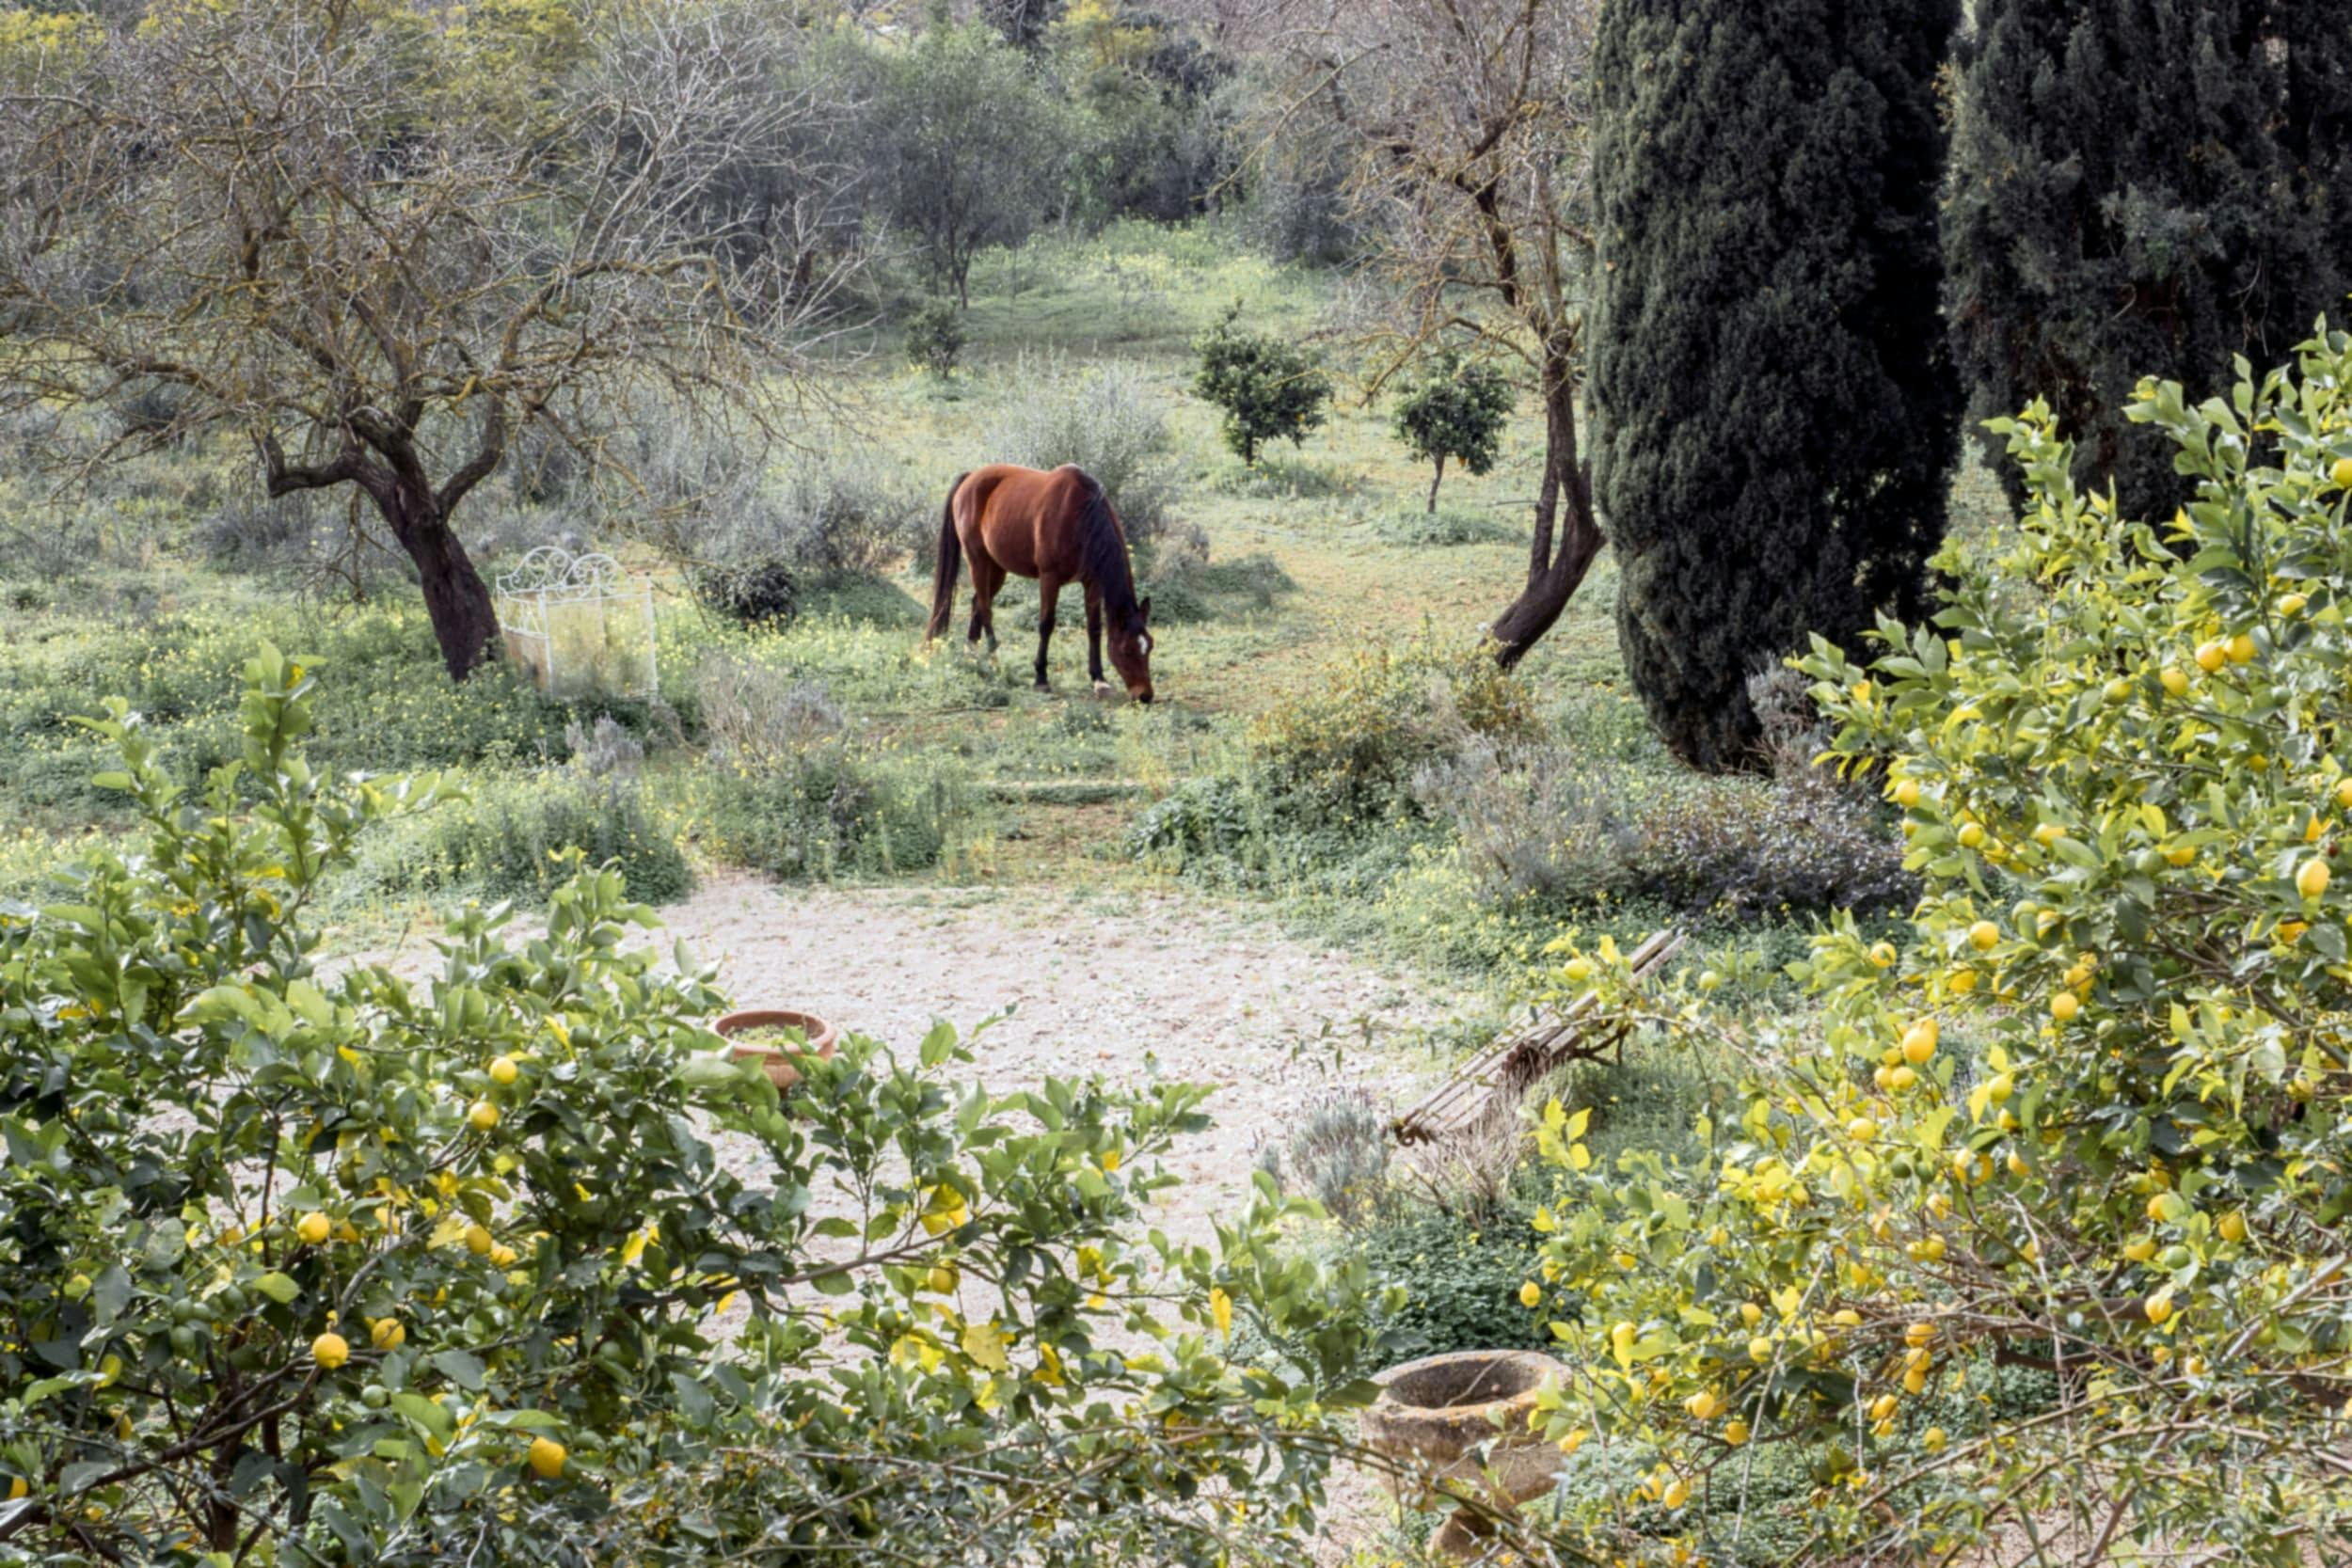 A brown horse is grazing in a field with trees, surrounded by a lush green forest.